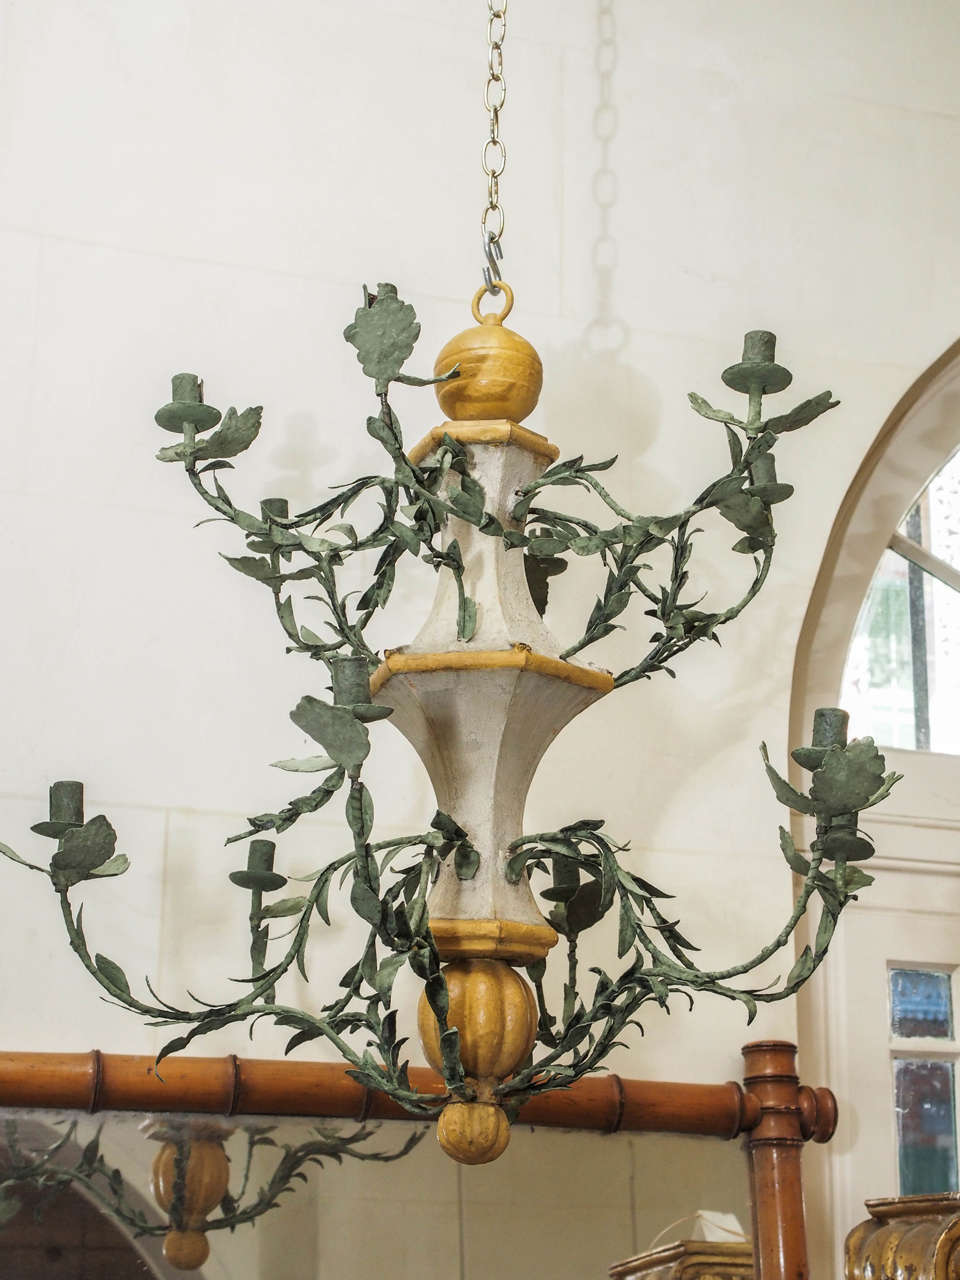 These late 18th century twelve-light l'orangerie chandeliers from the south of France have been meticulously restored. The stems and leaves are tole; it is not electrified.